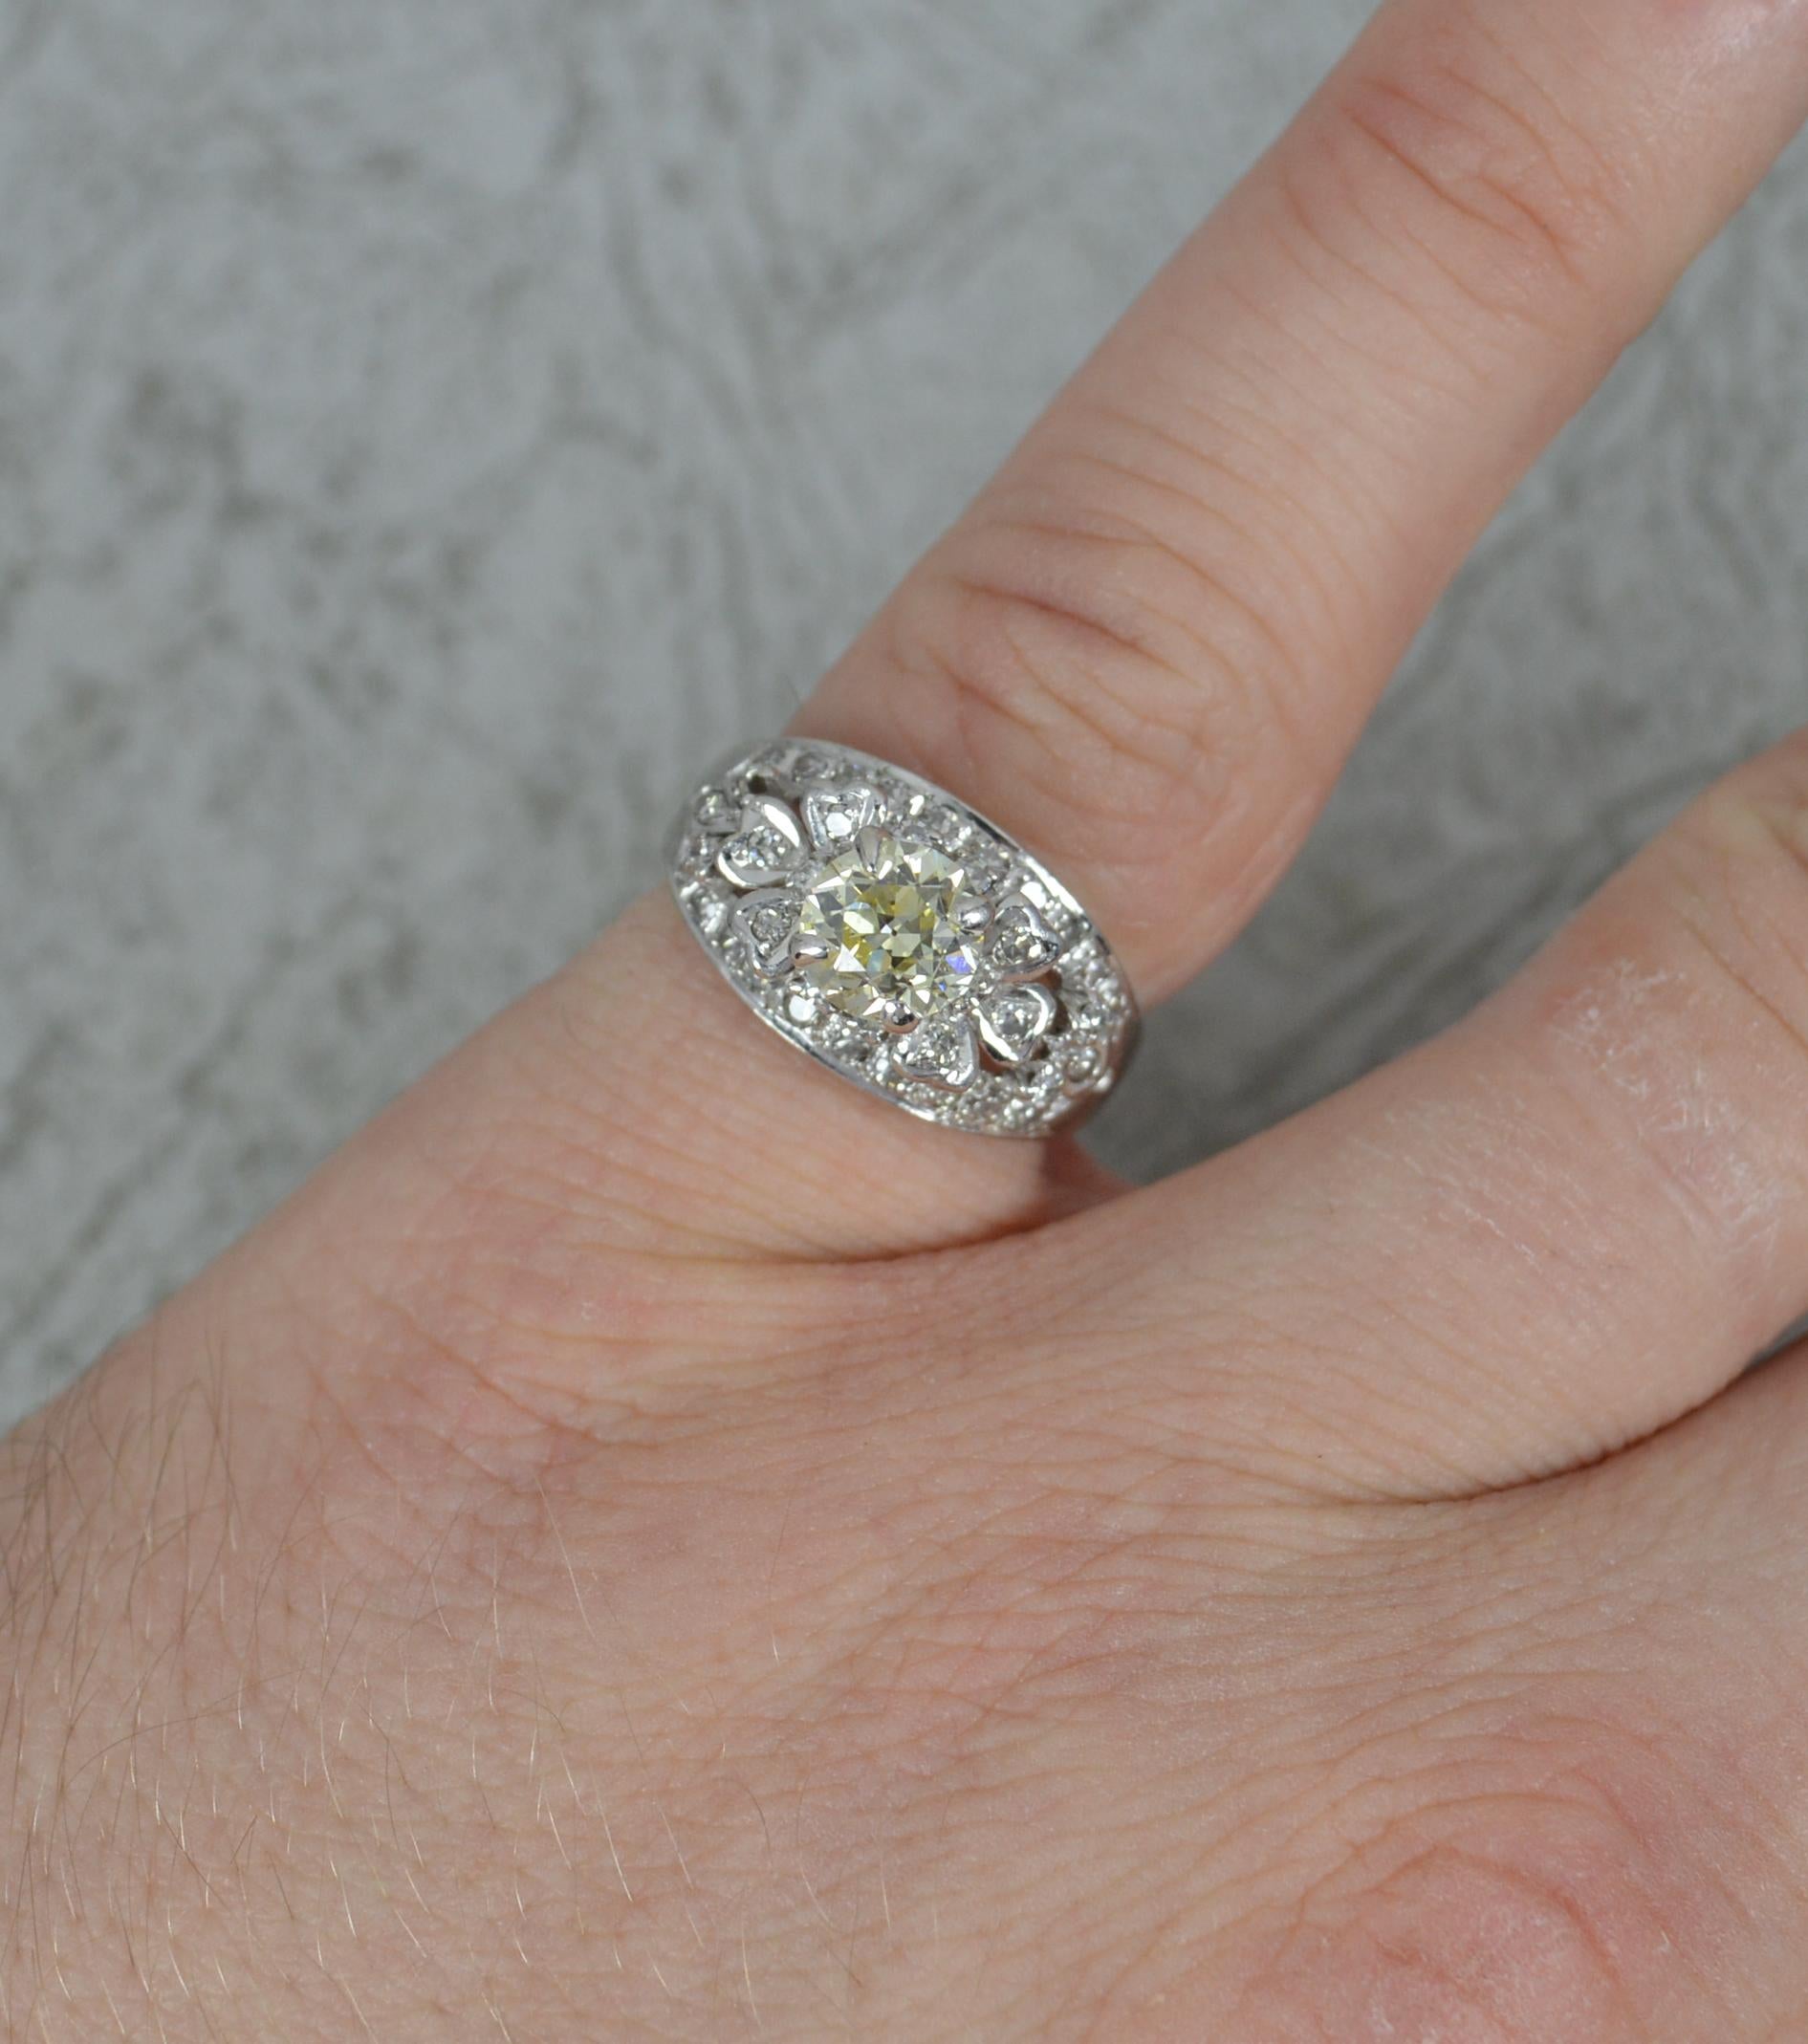 A superb quality antique cluster engagement ring.
Solid 18 carat white gold example.
Set with a natural, 6mm diameter, 0.85ct old cut diamond to the centre in a four claw setting. Natural, fancy yellow colour. Set above, below and to the sides are